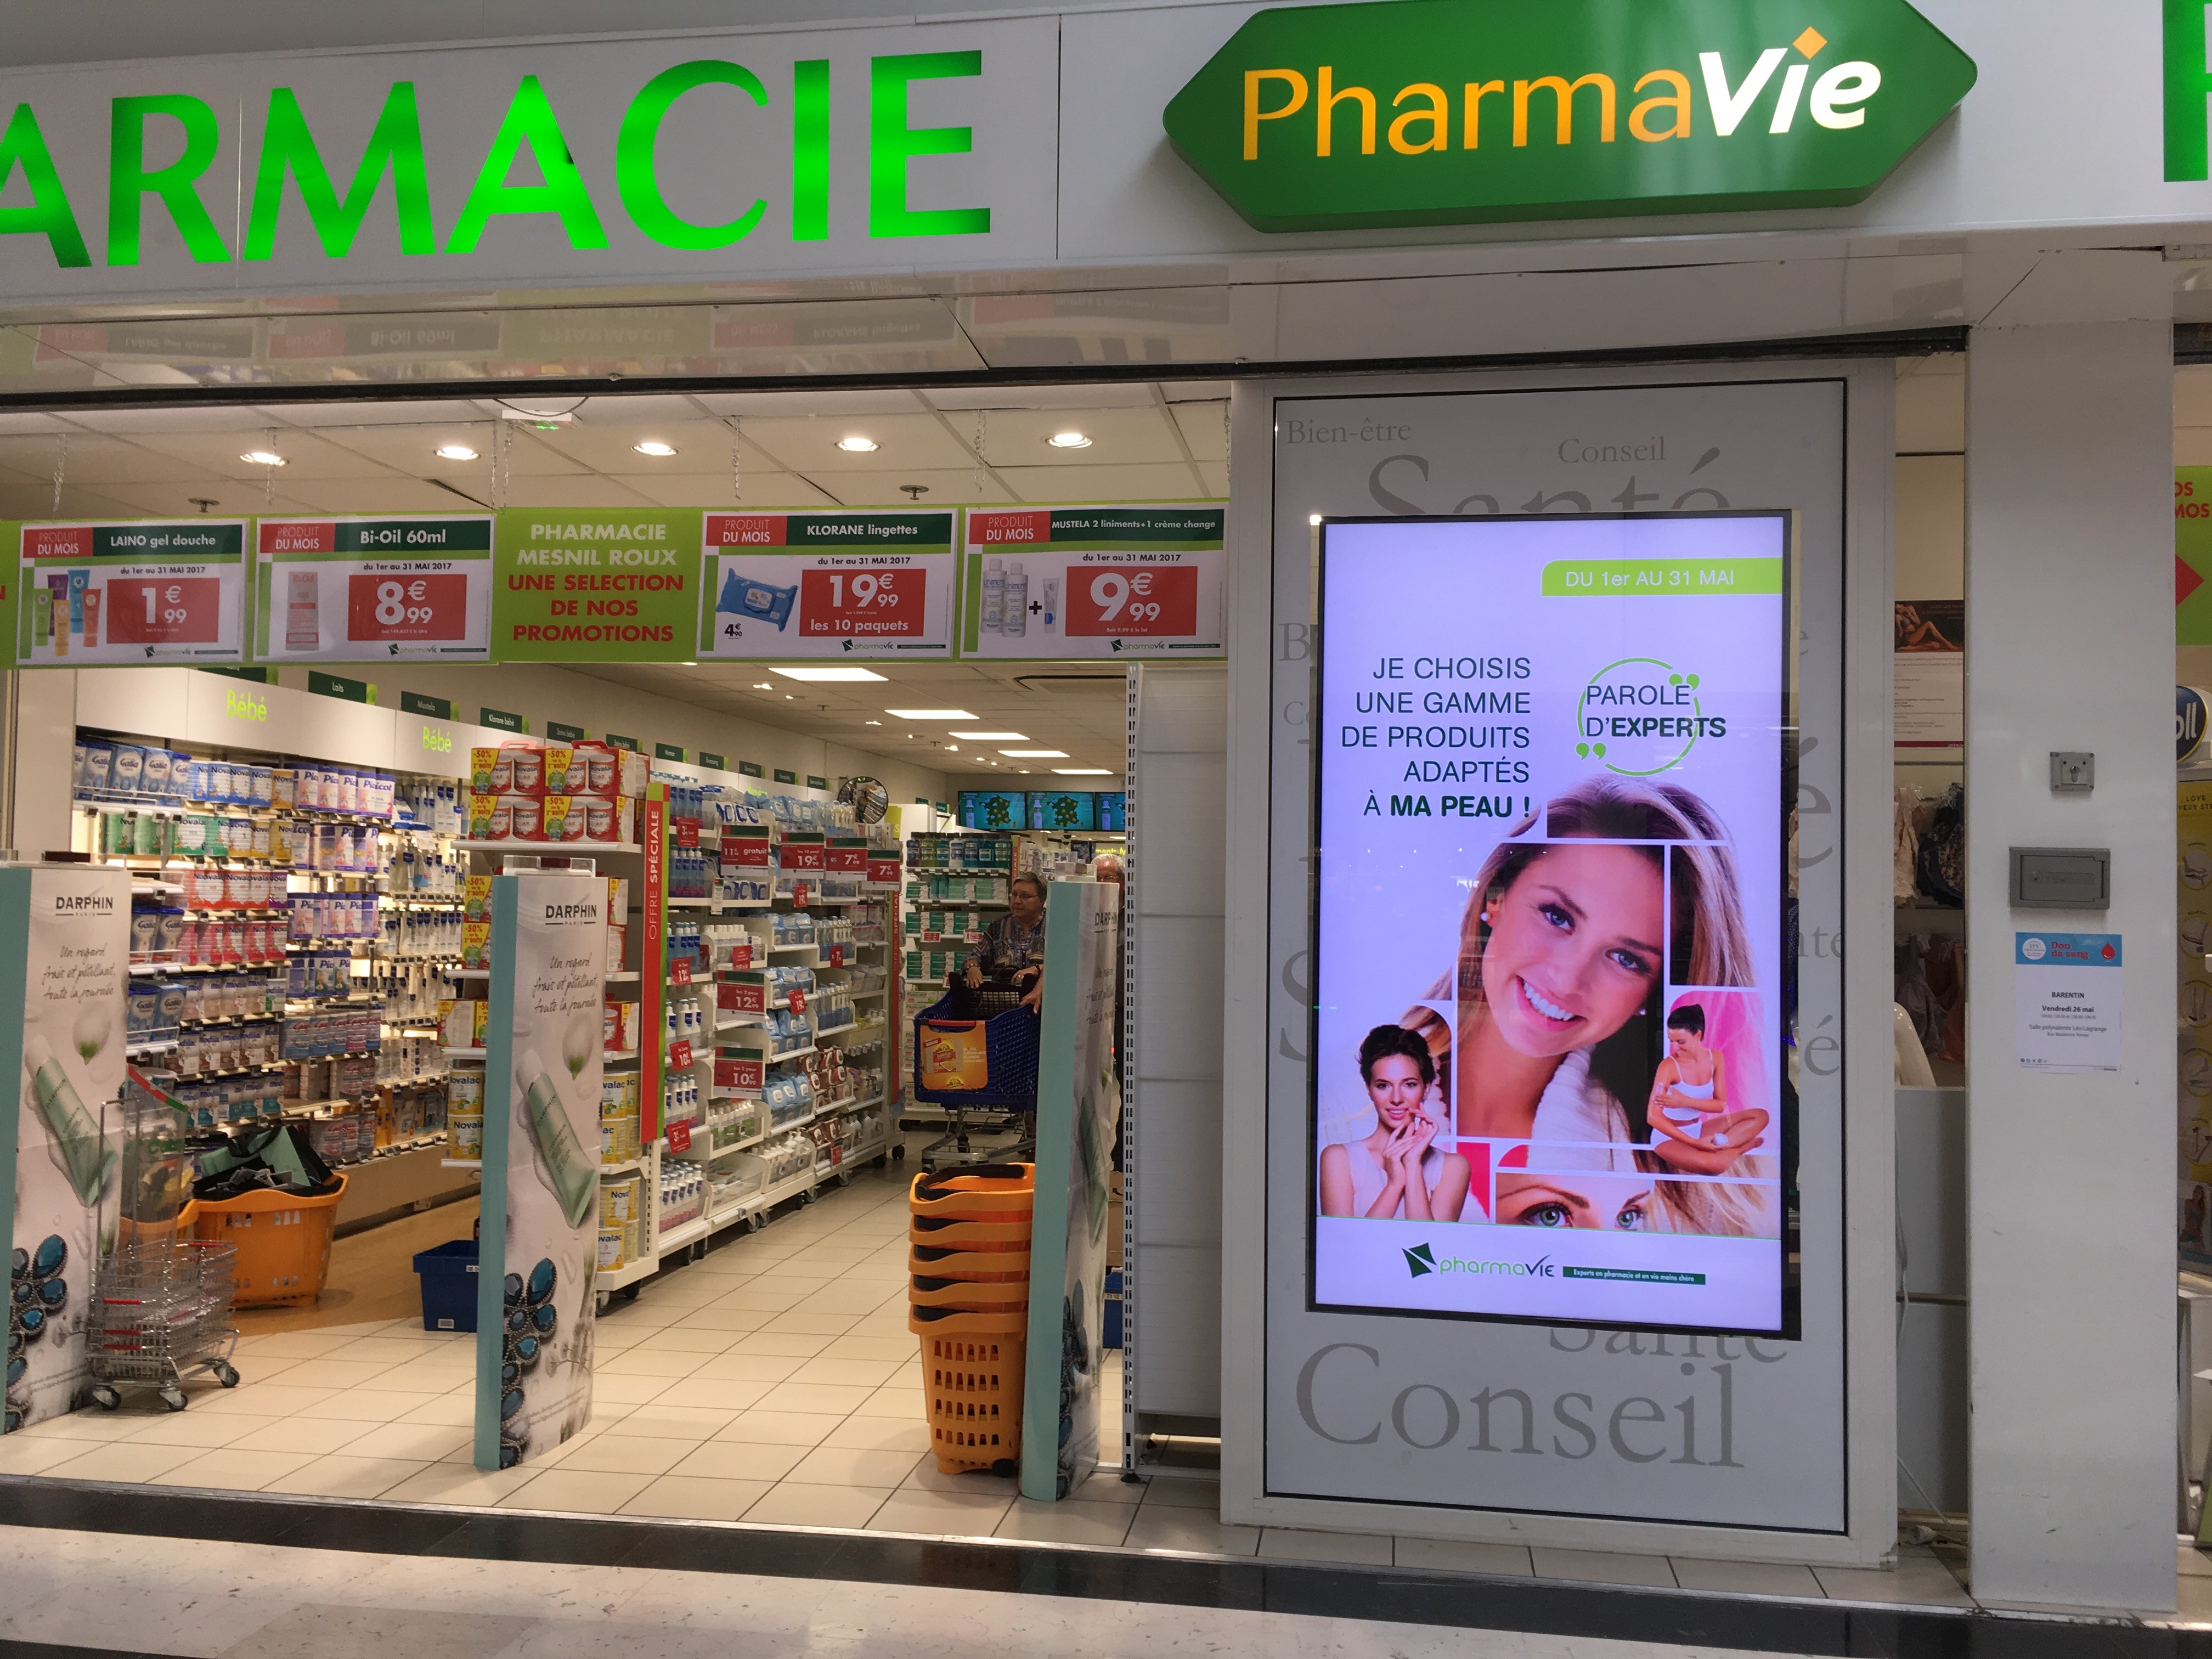 Entrance to a pharmacy with a big digital sign